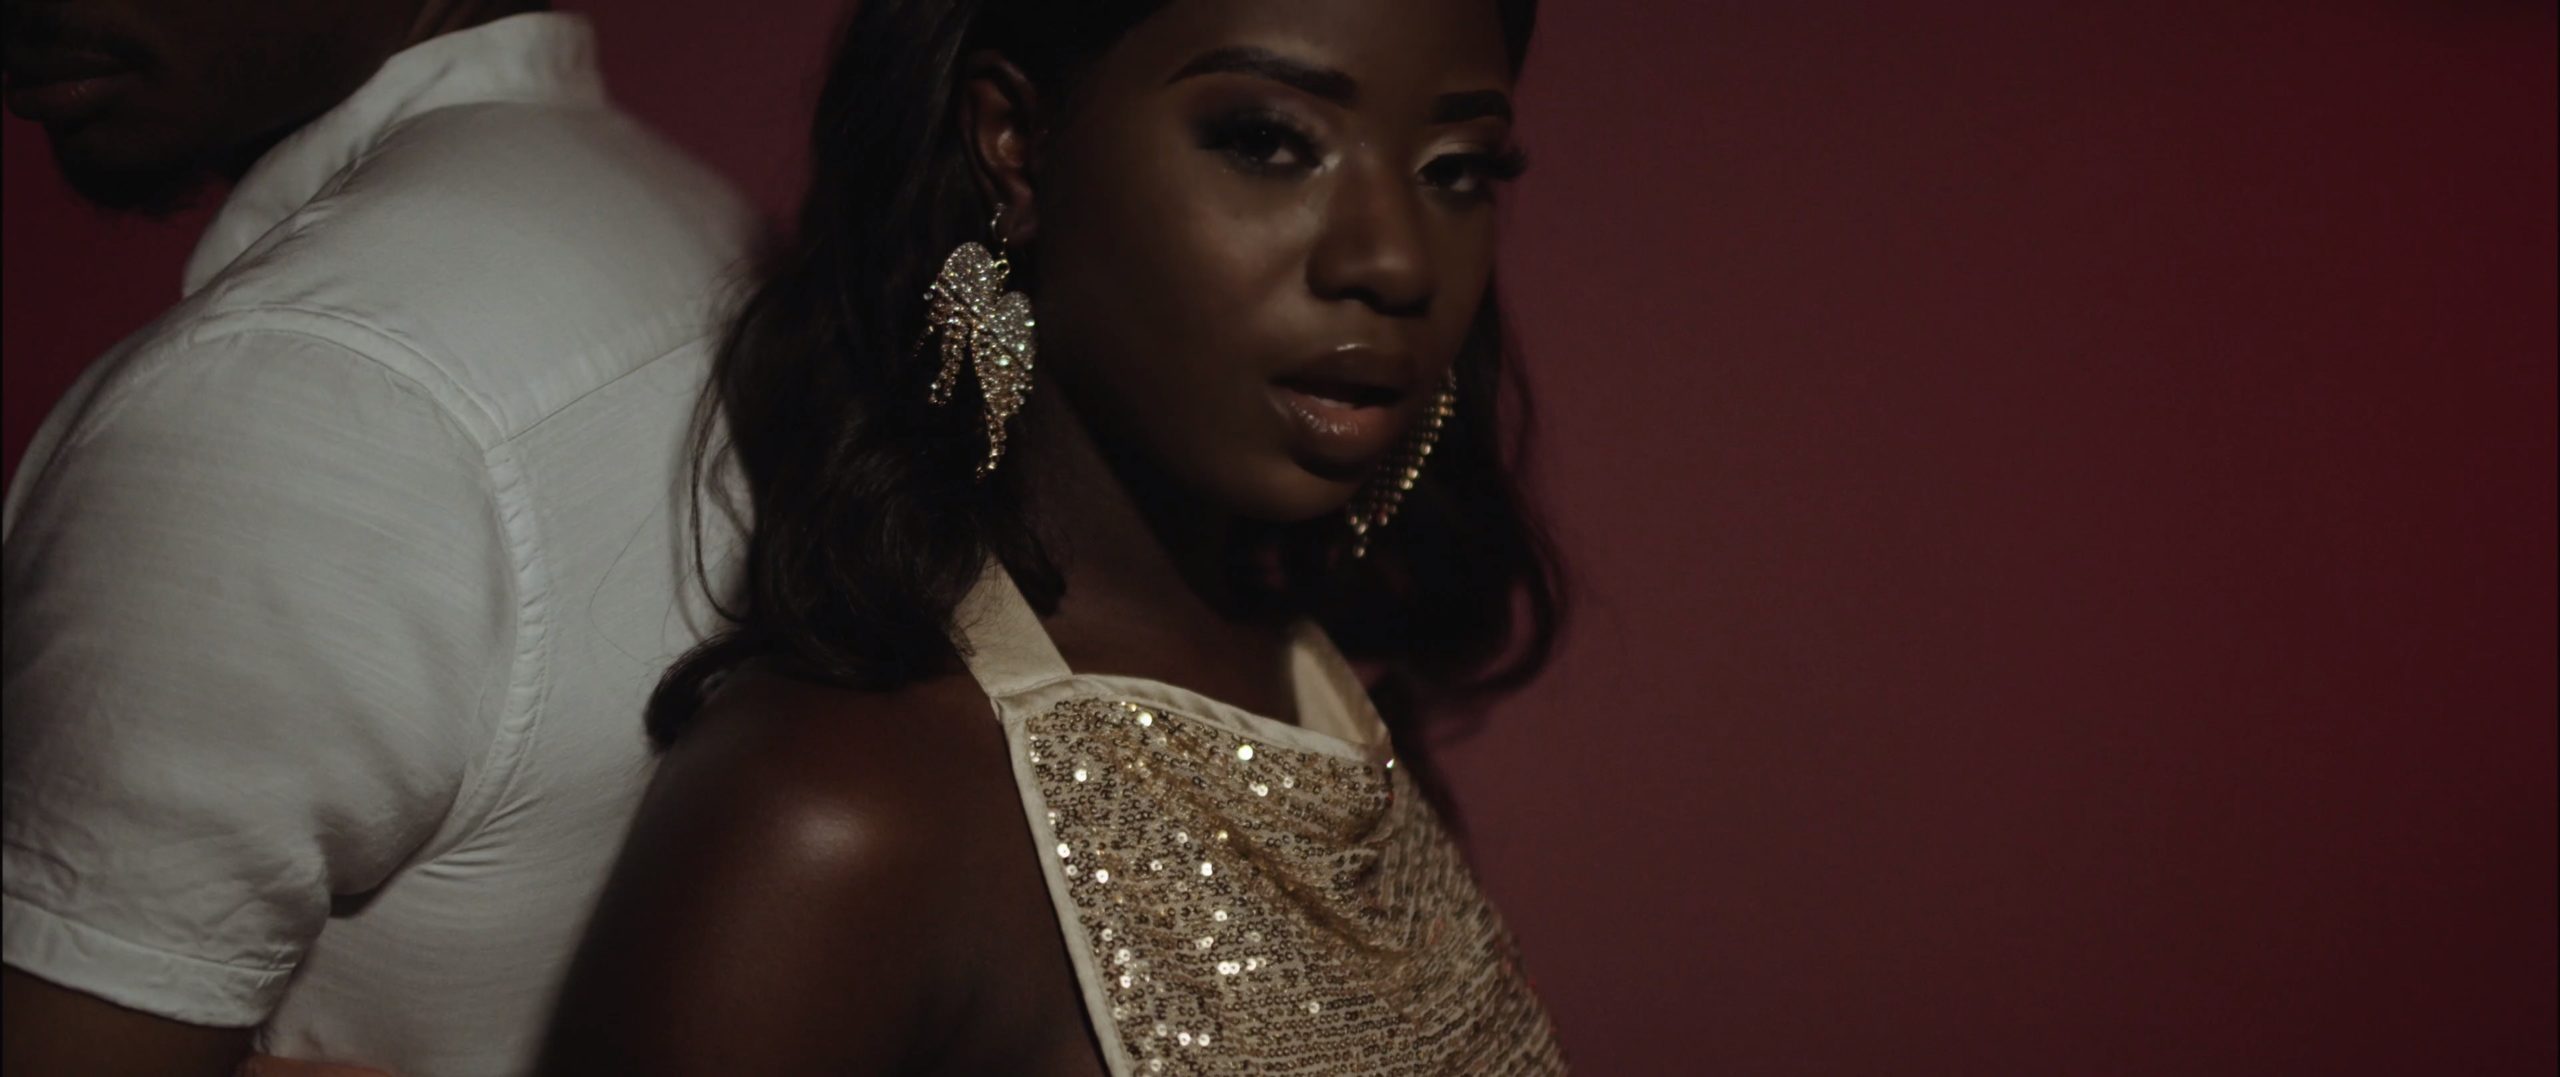 Laudz Fedeles Moody Music Video with headshot of her wearing a glittery dress back to back with a man wearing a white Polo shirt